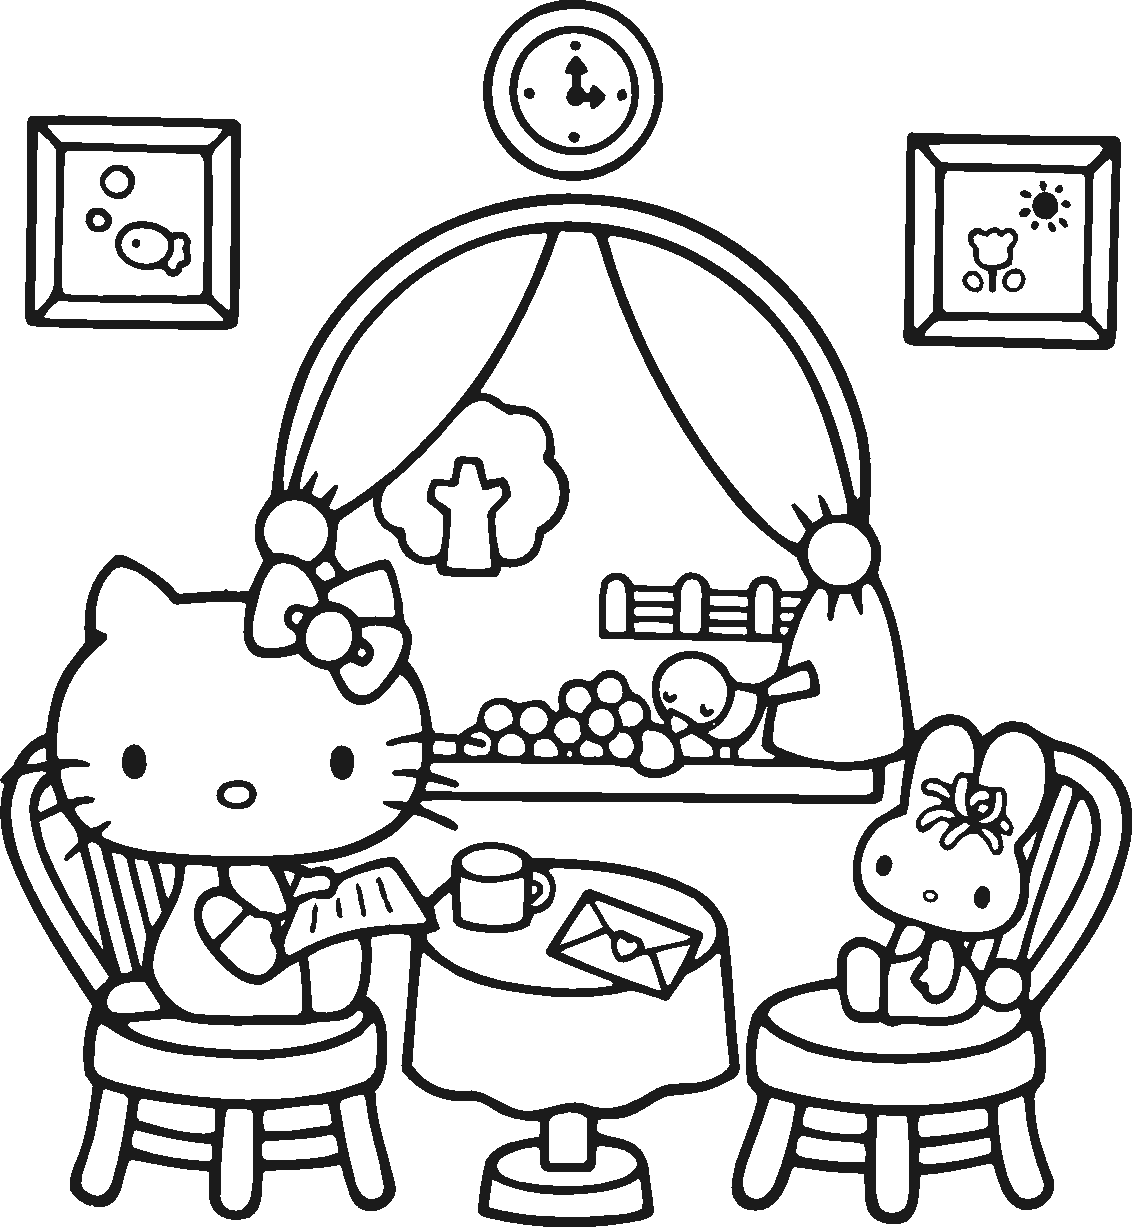 Hello Kitty Reading A Letter coloring page